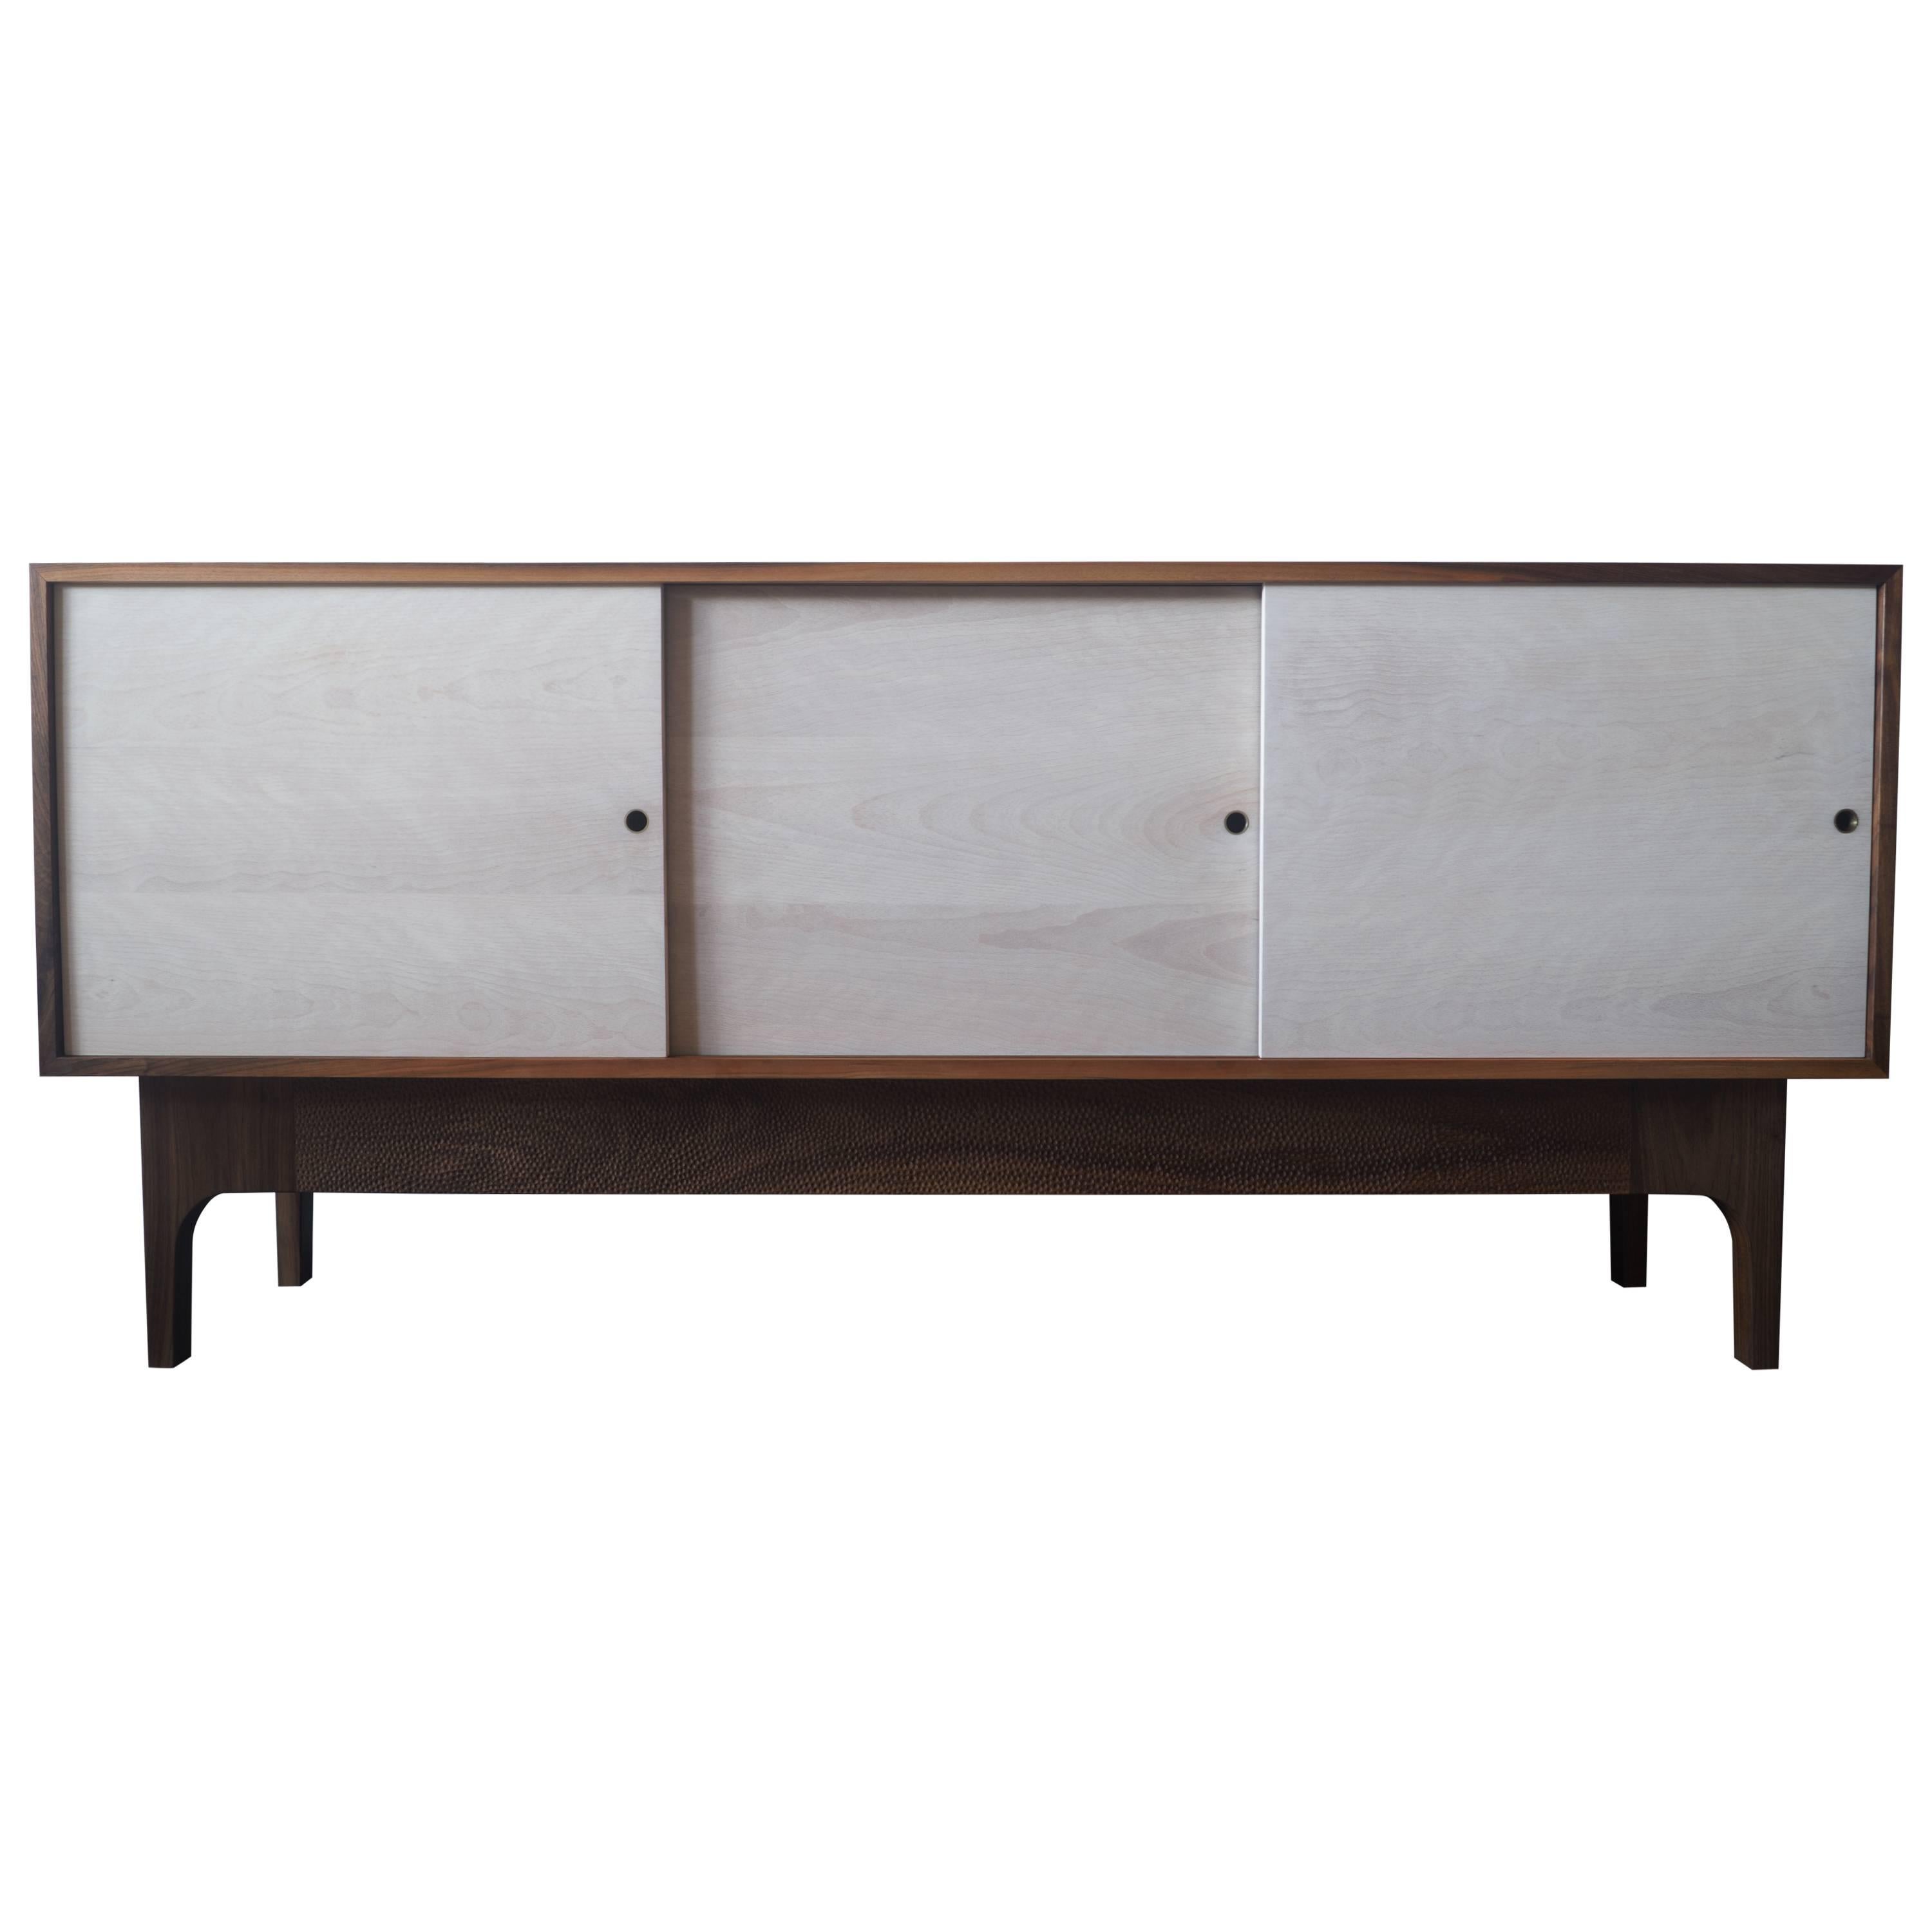 Eclipse Sideboard by MSJ Furniture Studio, Walnut Case with Sliding Beech Doors For Sale